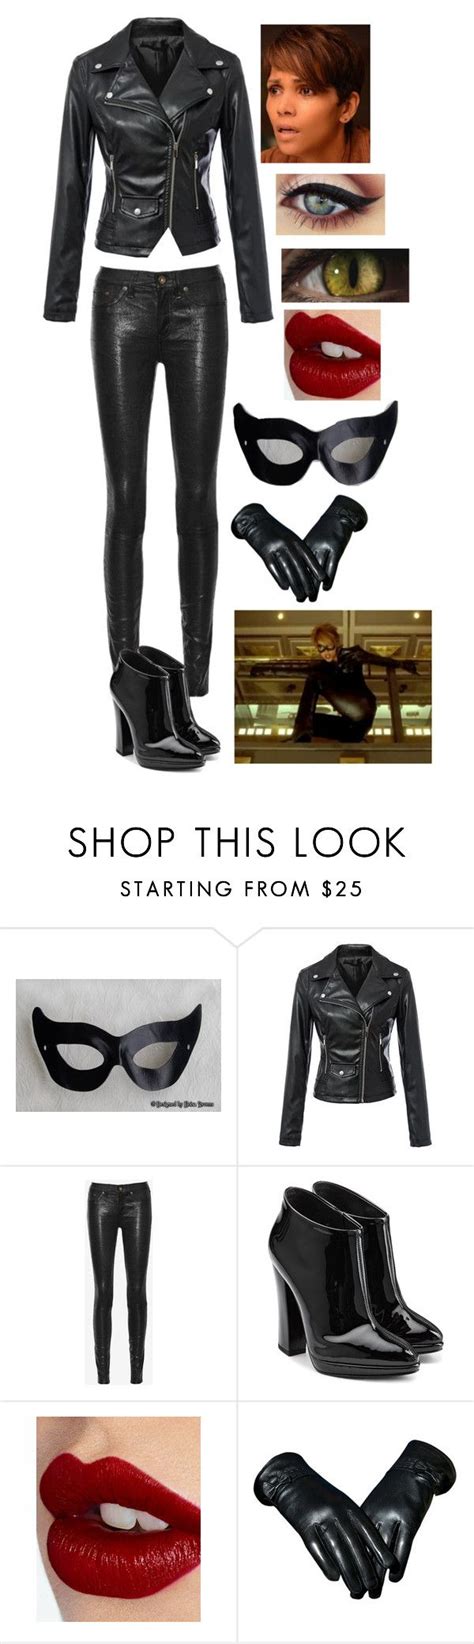 Catwoman Halle Berry Bank Scene Cat Woman Costume Clothes Design